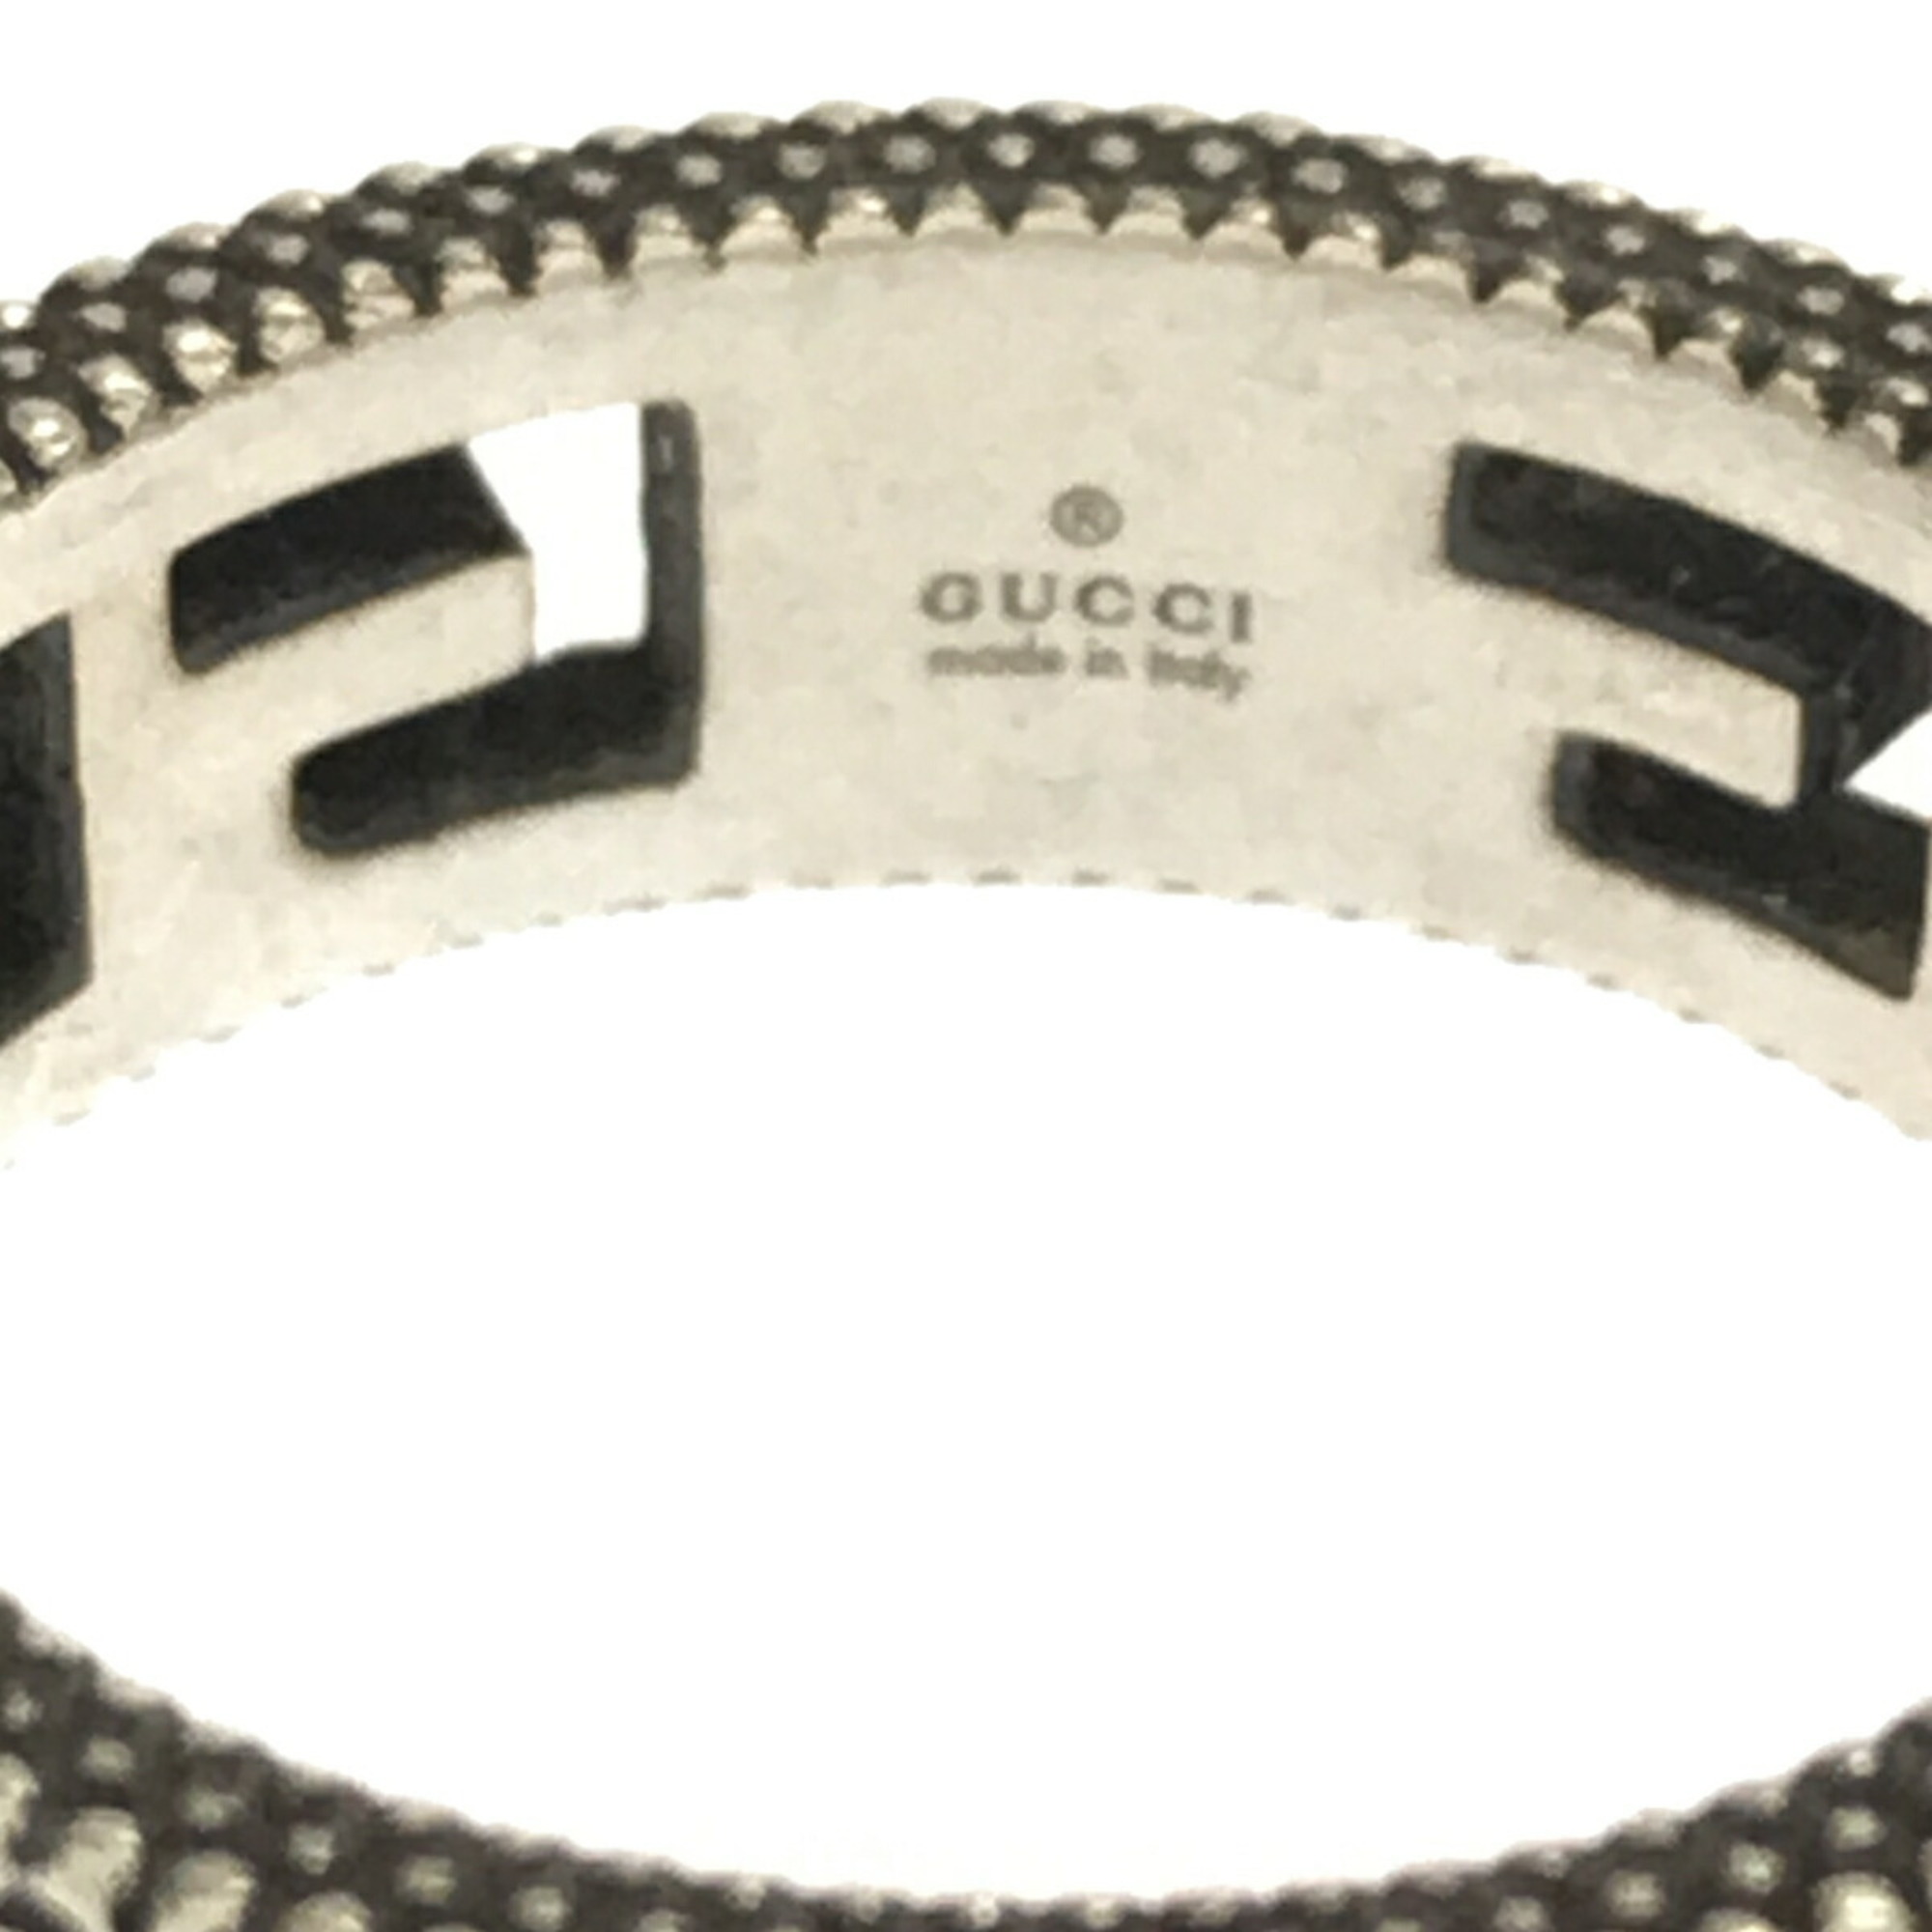 GUCCI Ring 551918 ag925 Women's Men's Accessories Miscellaneous Goods SILVER Silver ITEOXY0BKQEE RM2308M